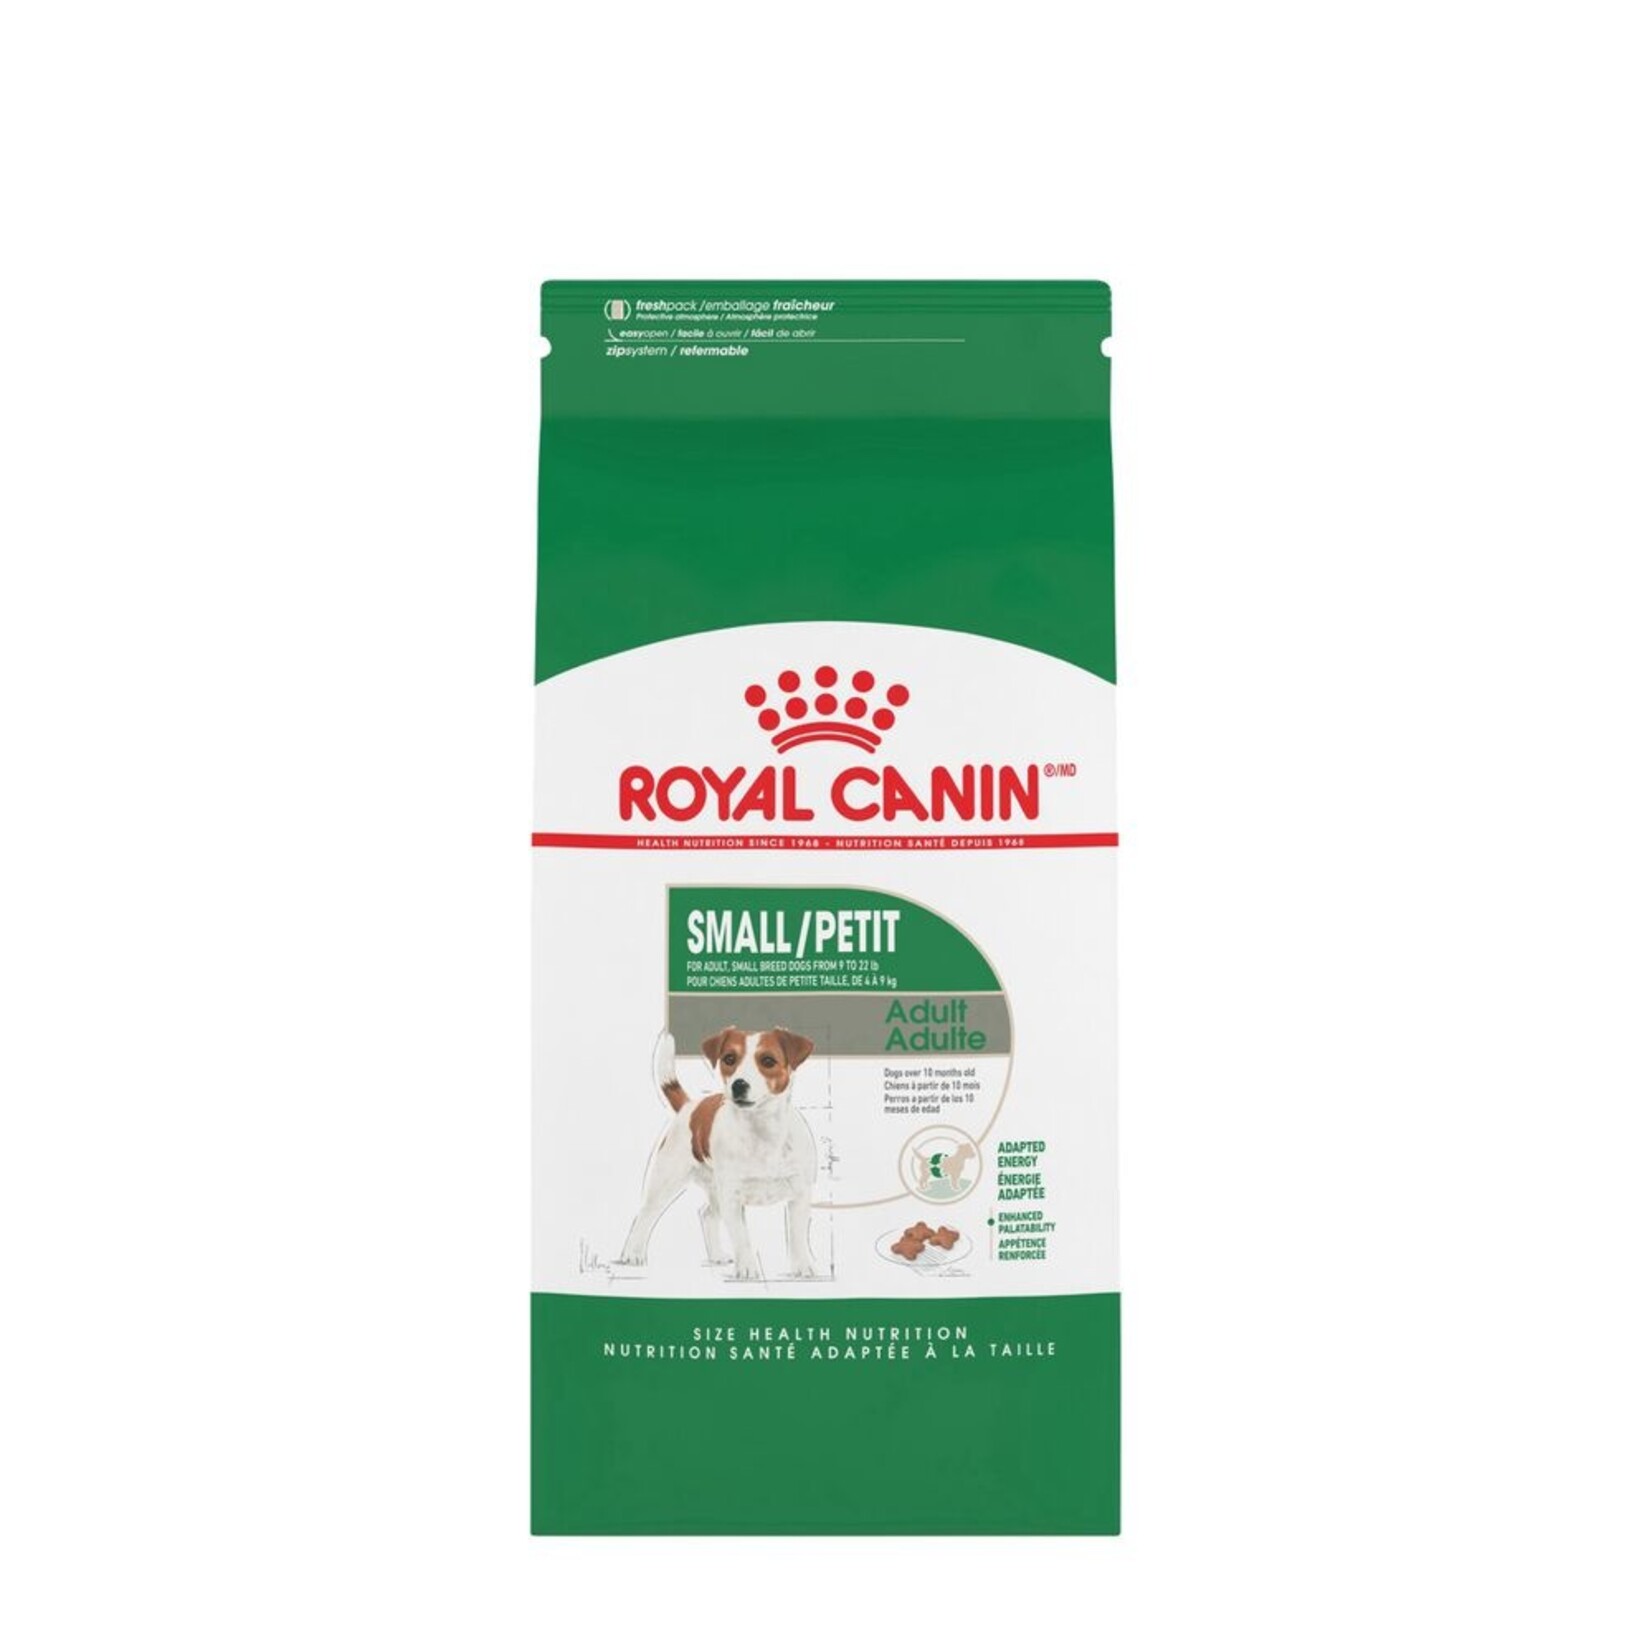 ROYAL CANIN ROYAL CANIN PETIT CHIEN ADULTE 2 KG